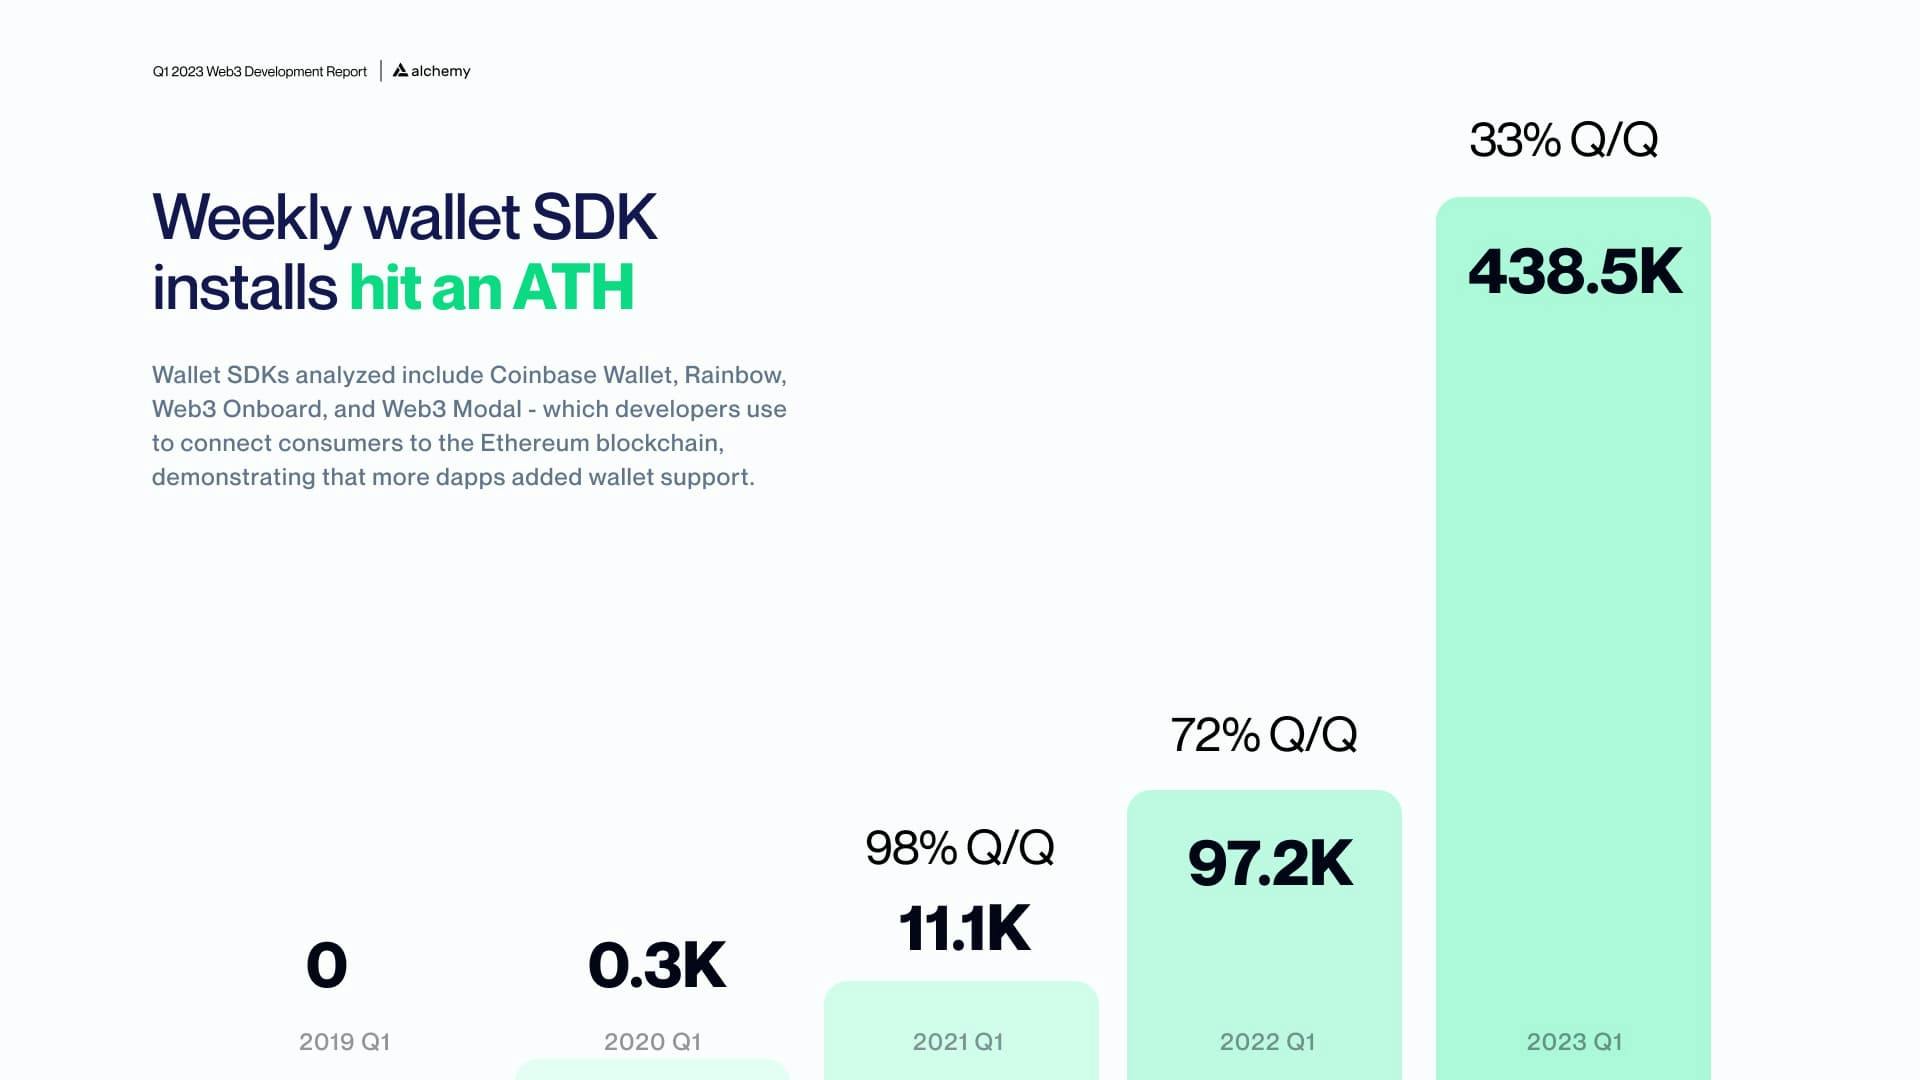 Q1 statistics of weekly wallet SDK installs from 2019 to 2023